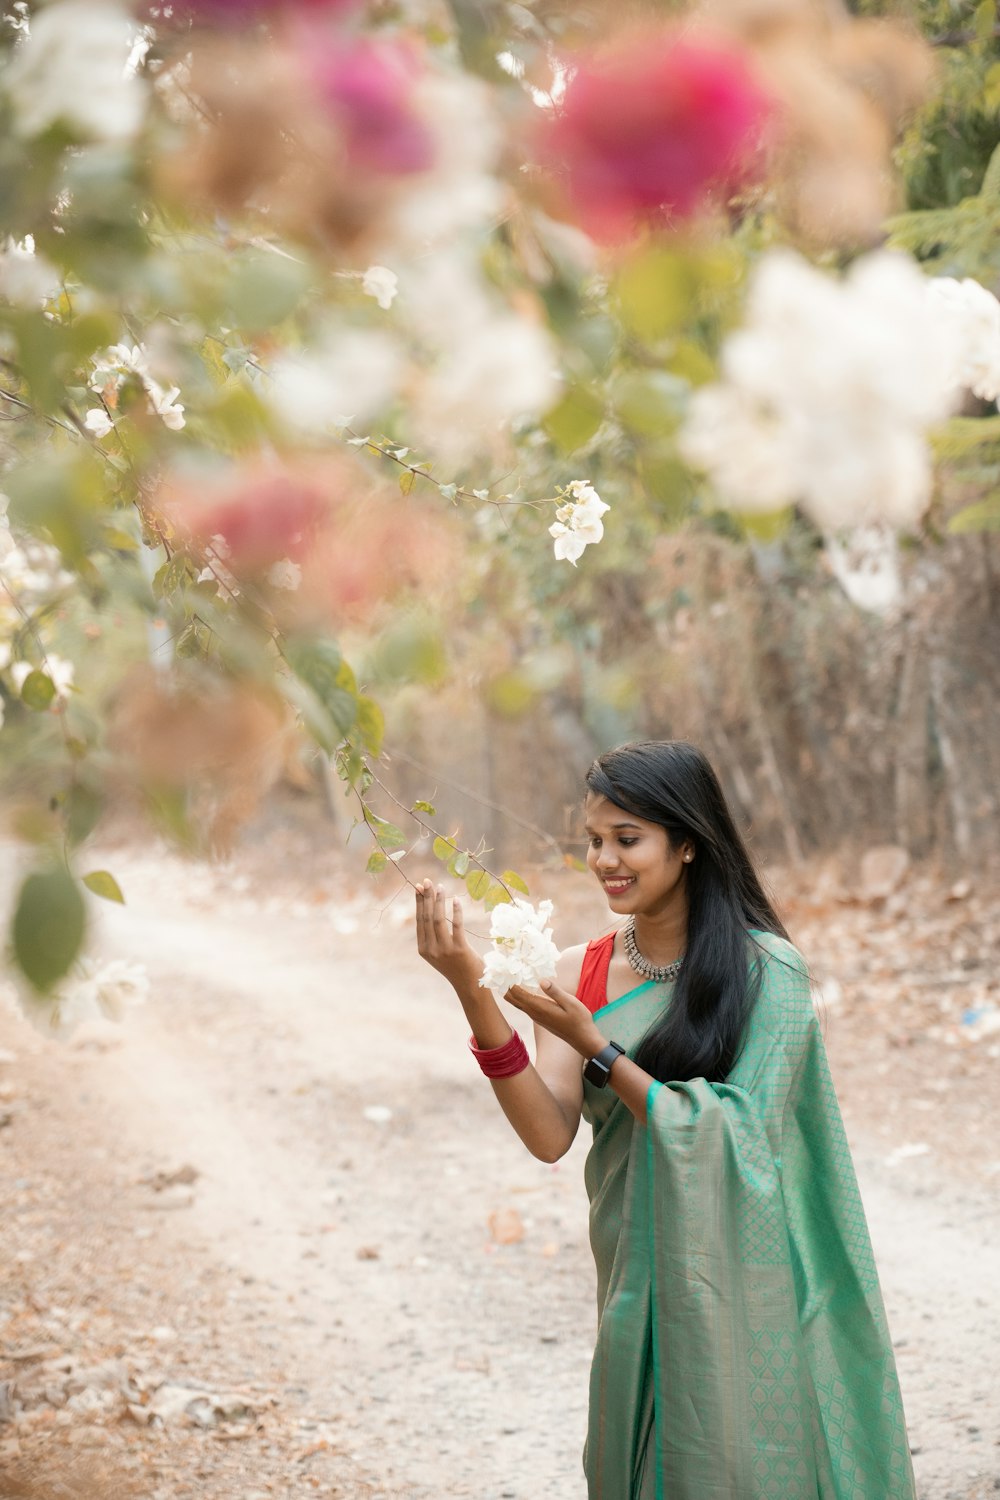 a woman in a green sari holding flowers